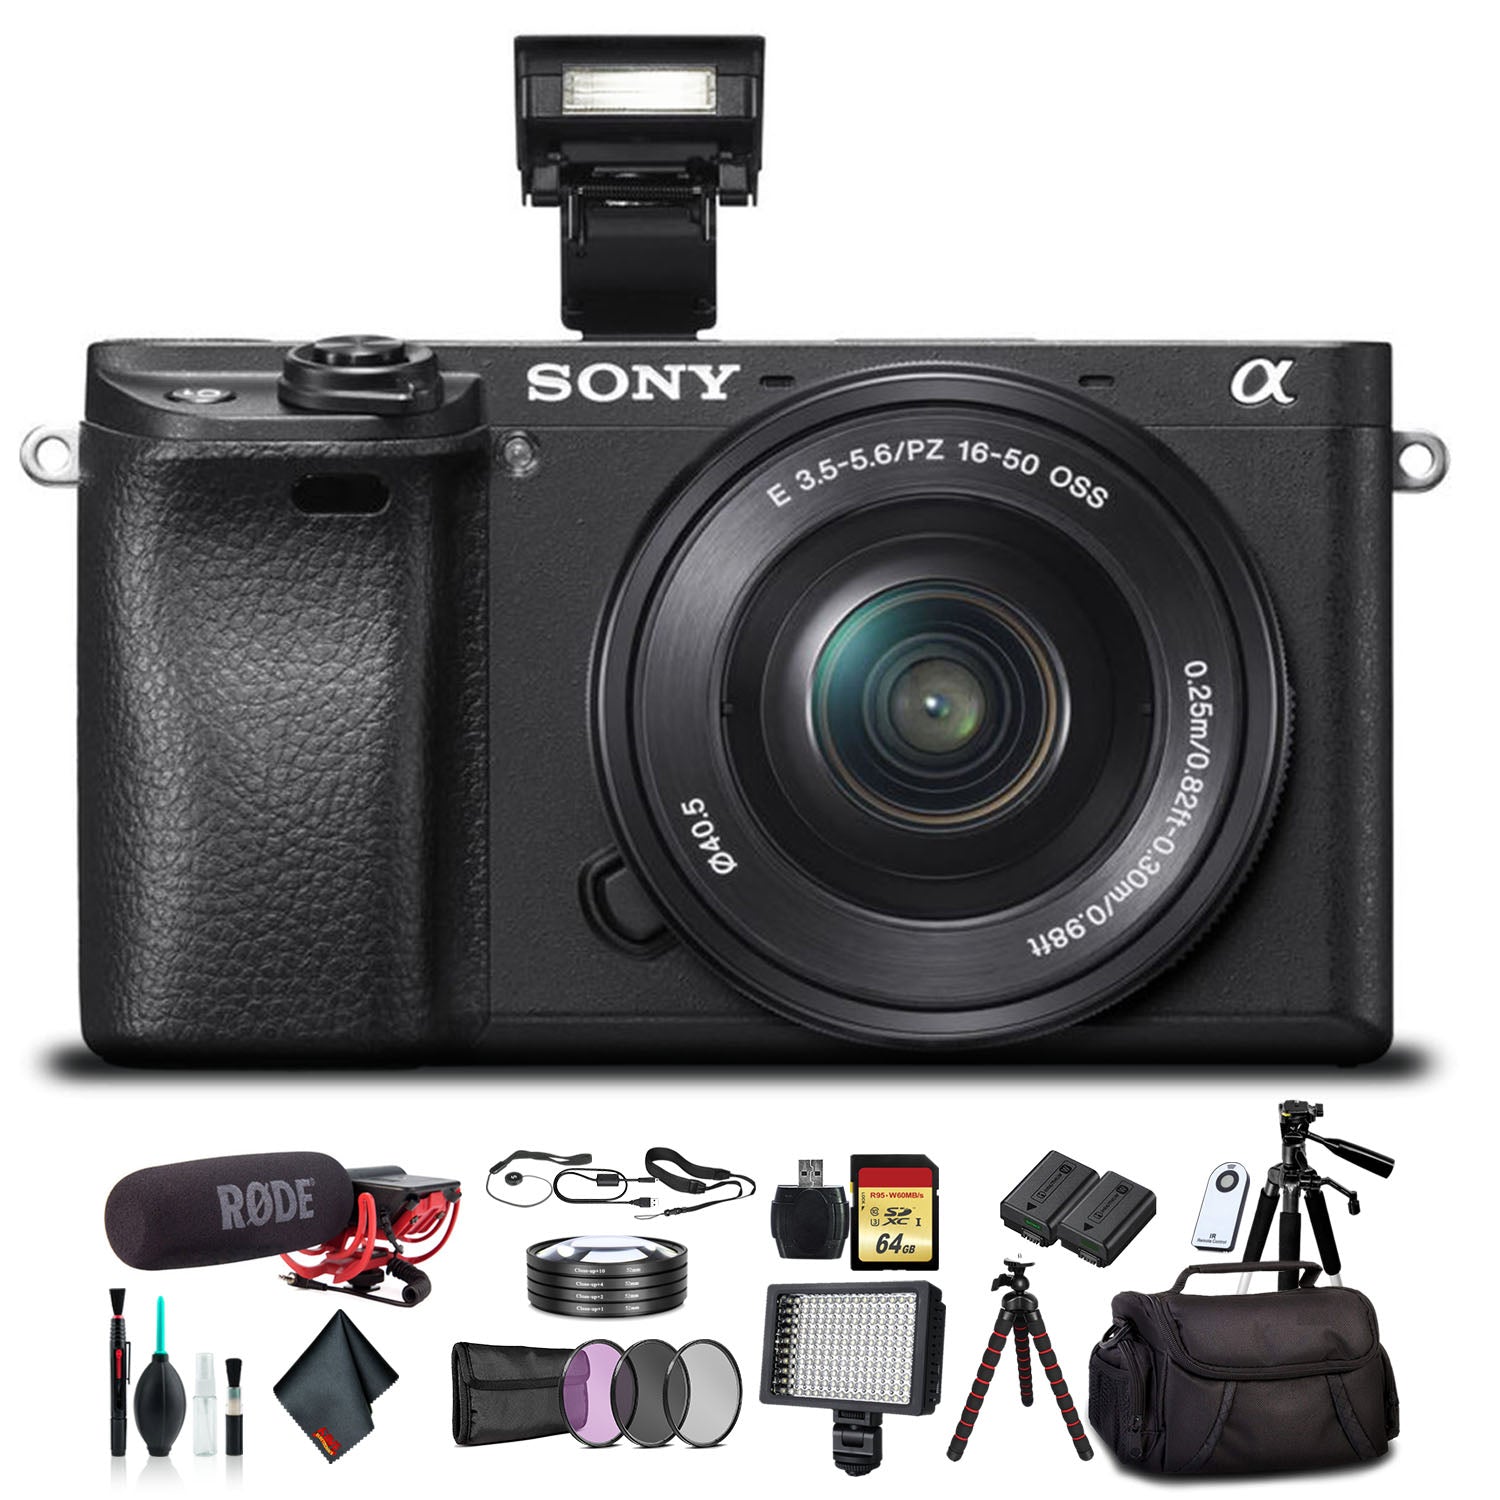 Sony Alpha a6300 Mirrorless Camera with 16-50mm Lens Black ILCE6300L/B With Soft Bag, Tripod, Additional Battery, Rode Mic, LED Light, 64GB Memory Card, Card Reader , Plus Essential Accessories